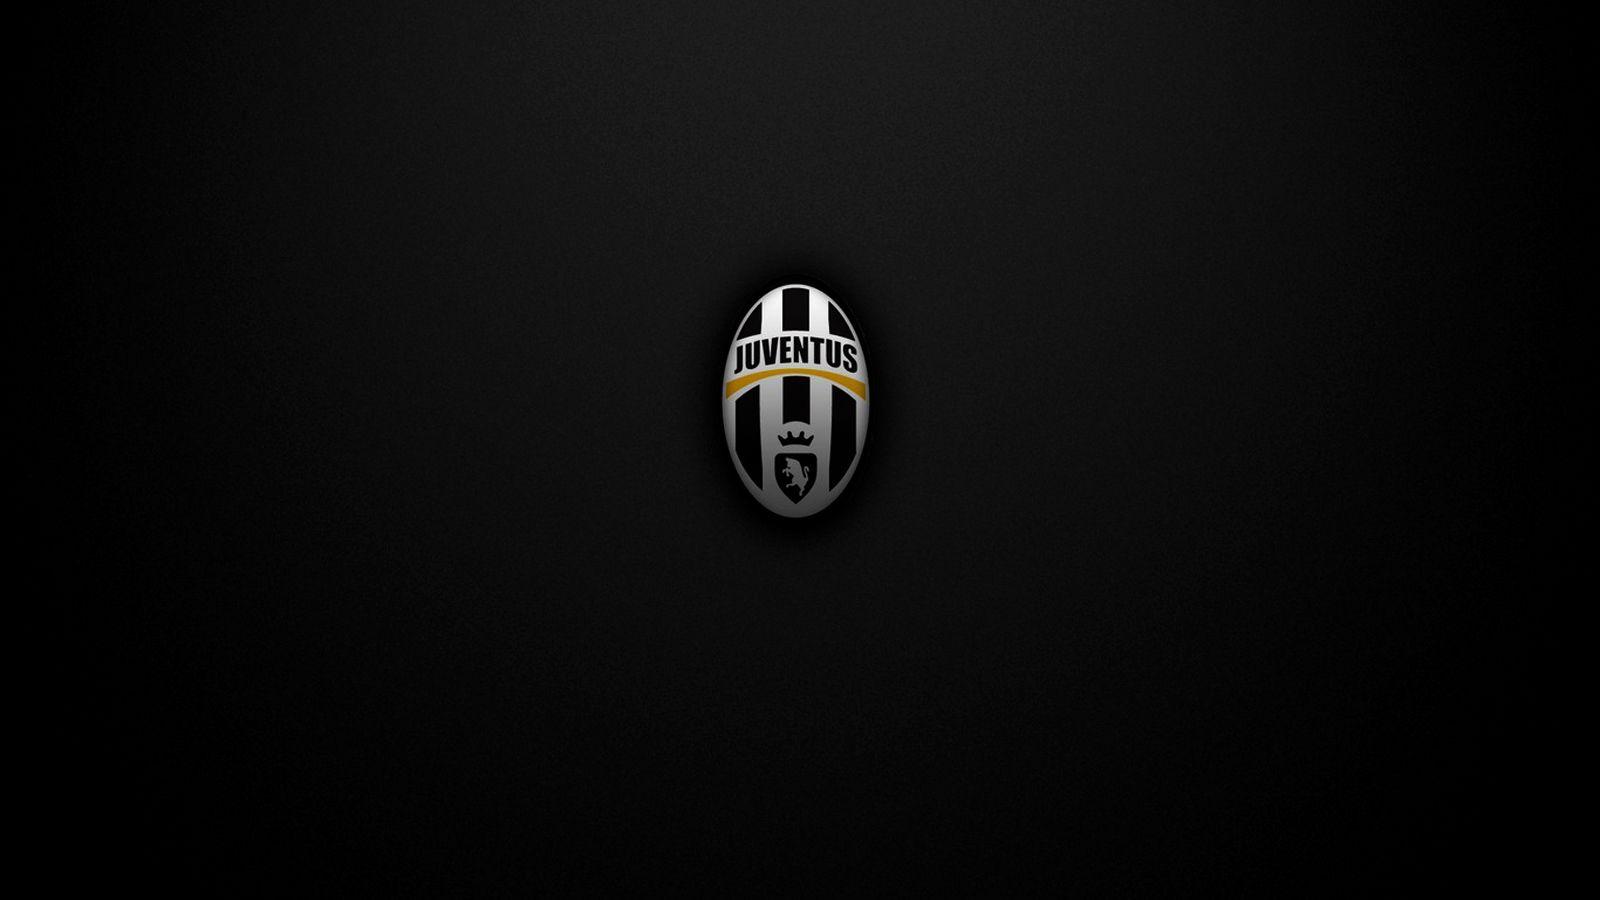 JUVENTUS FC LOGO HD WALLPAPERS For Windows 7. picture